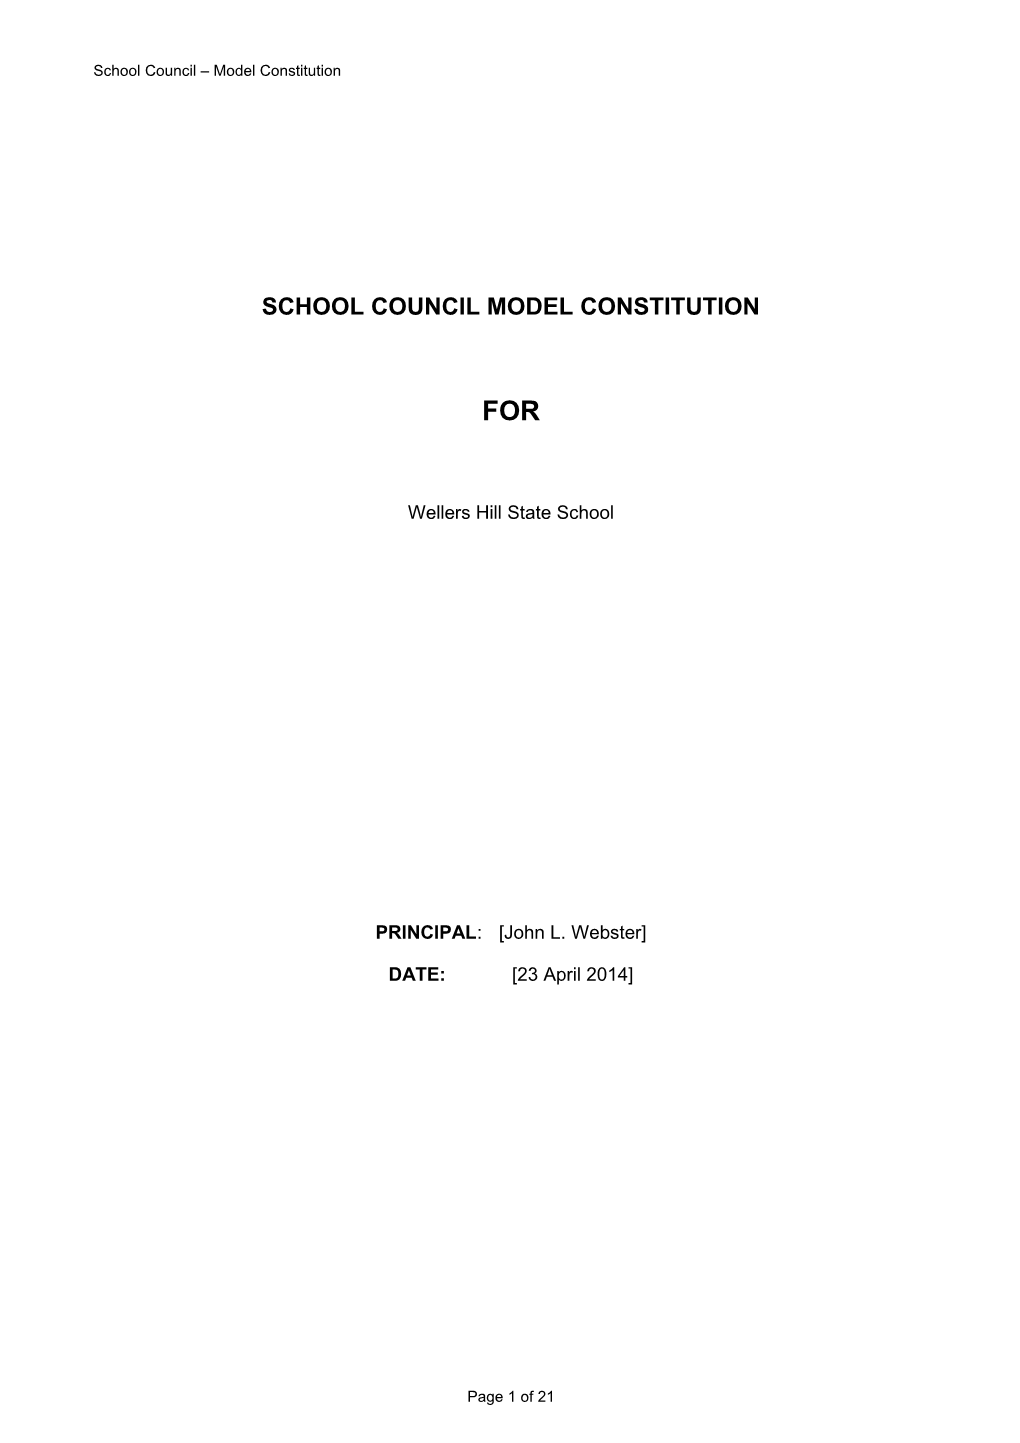 WHSS-School-Council-Model-Constitution